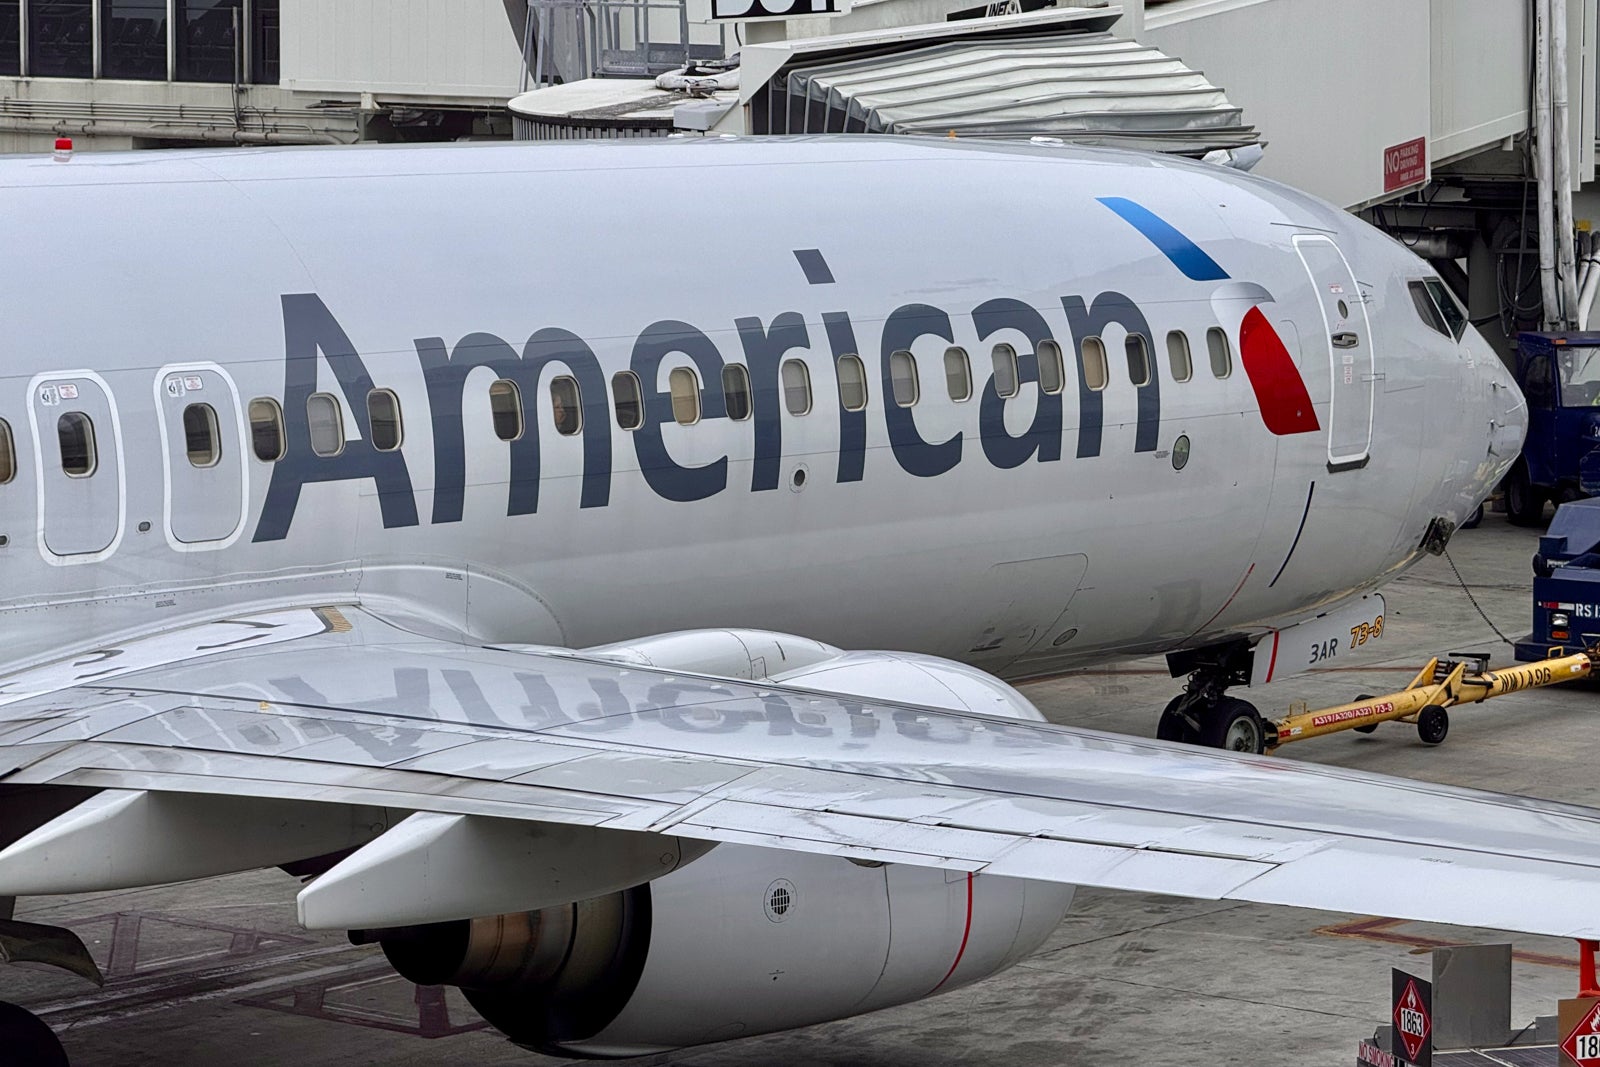 american airlines travel schedule